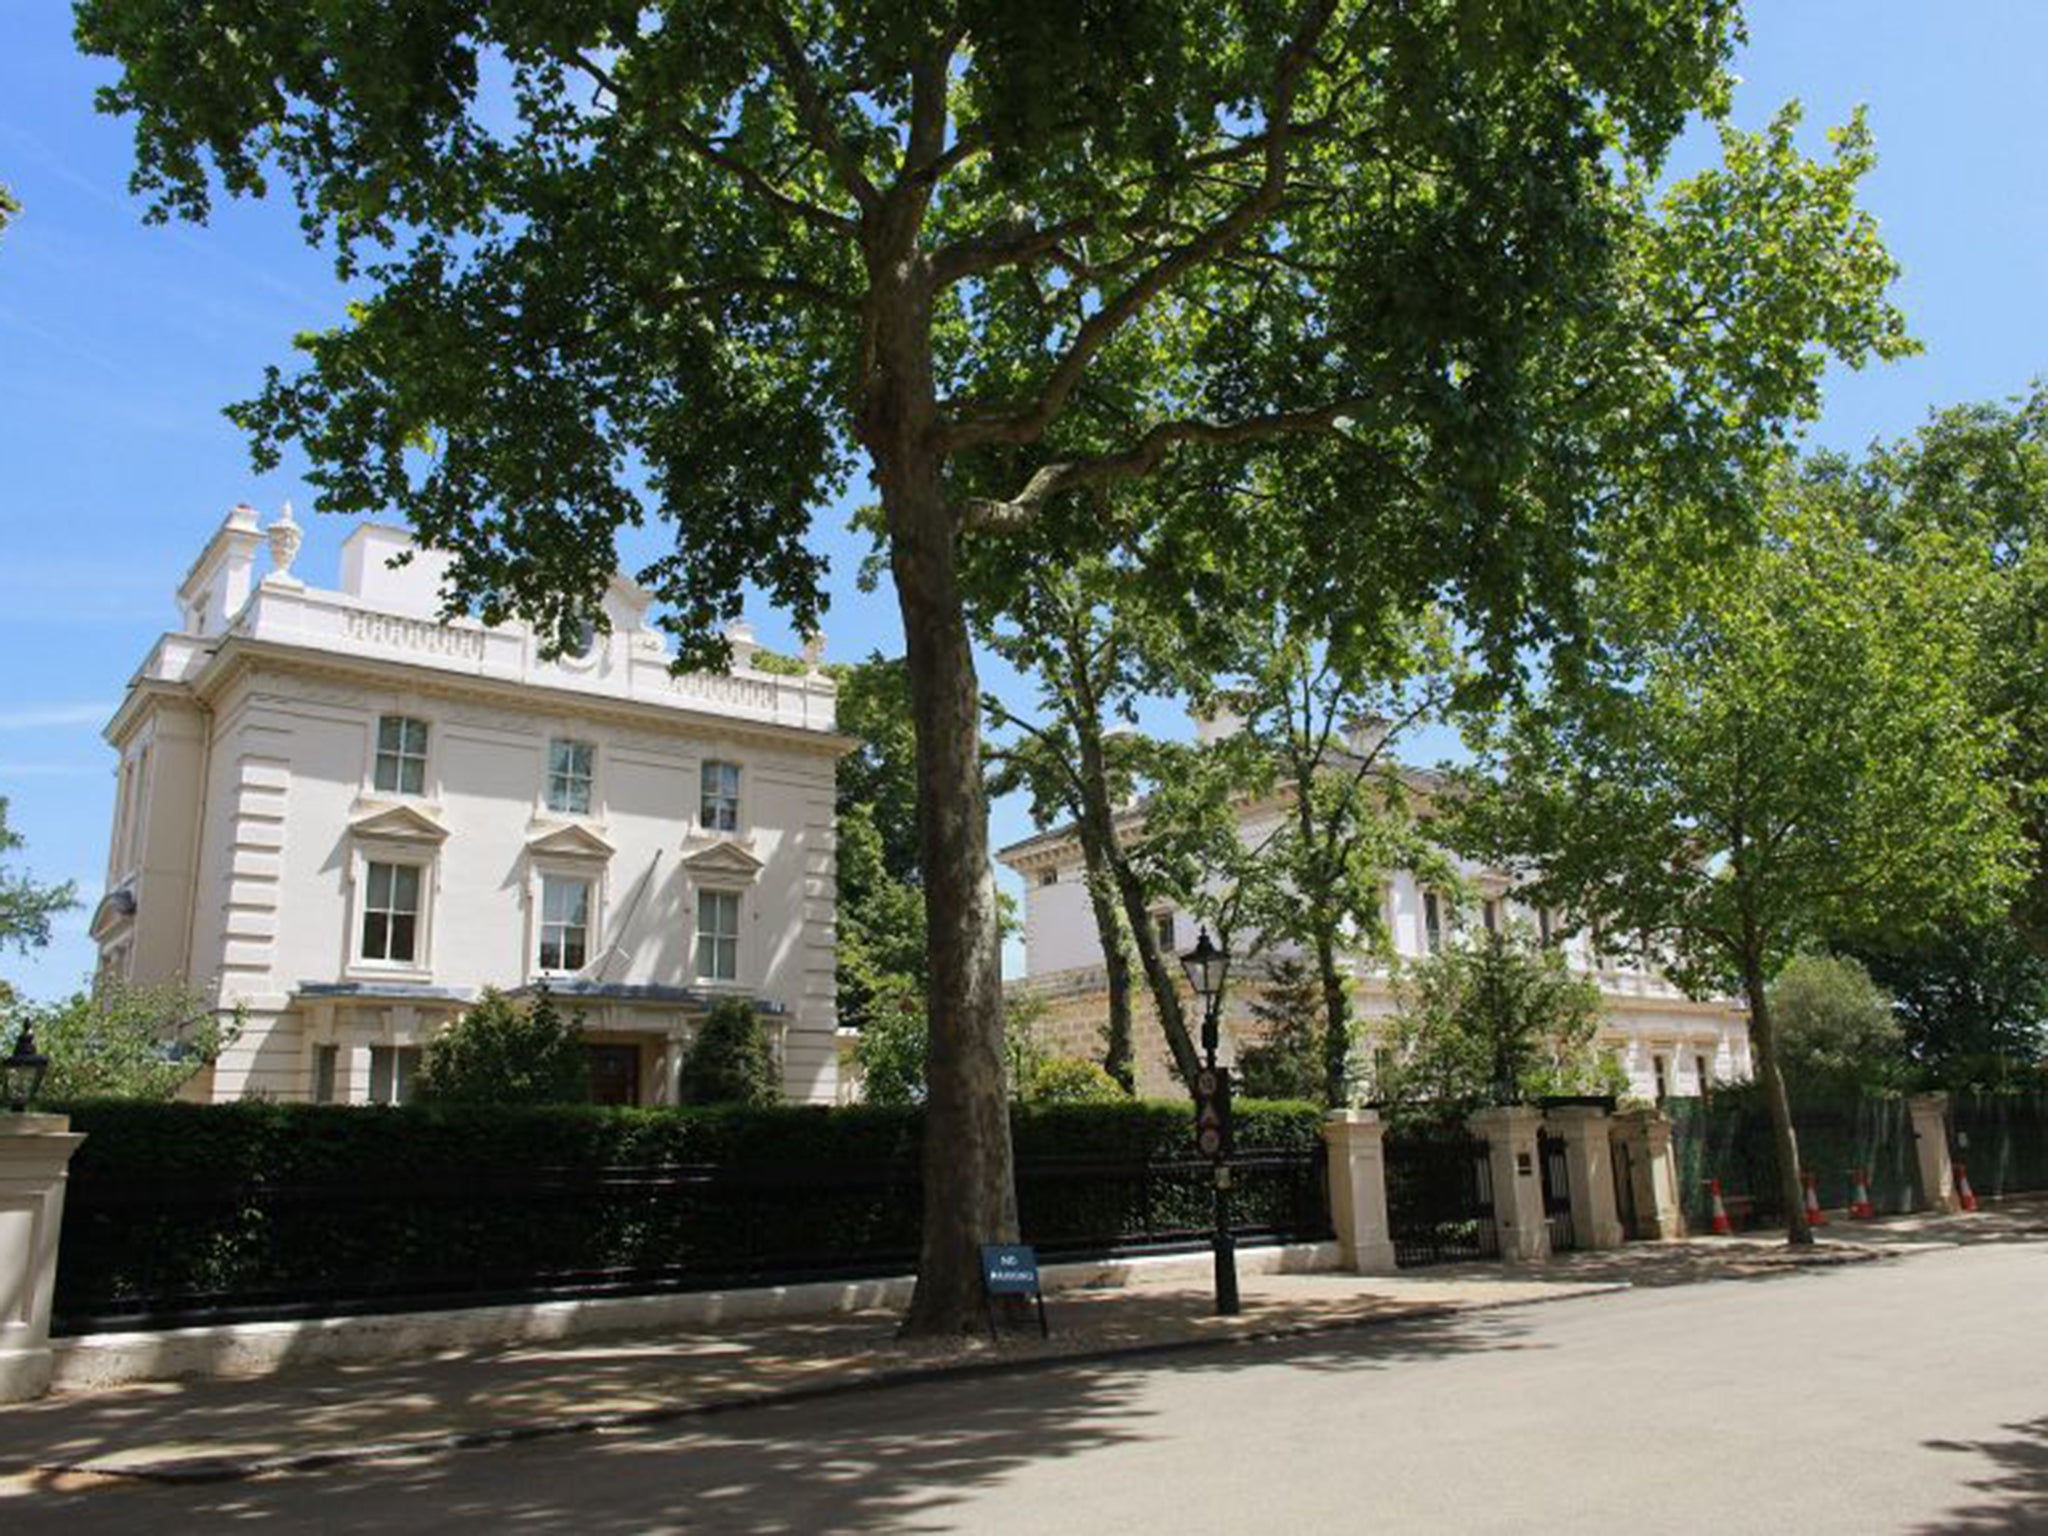 While Kensington & Chelsea is home to Britain’s most expensive street, Kensington Palace Gardens, left, there are pockets of deprivation in the constituency